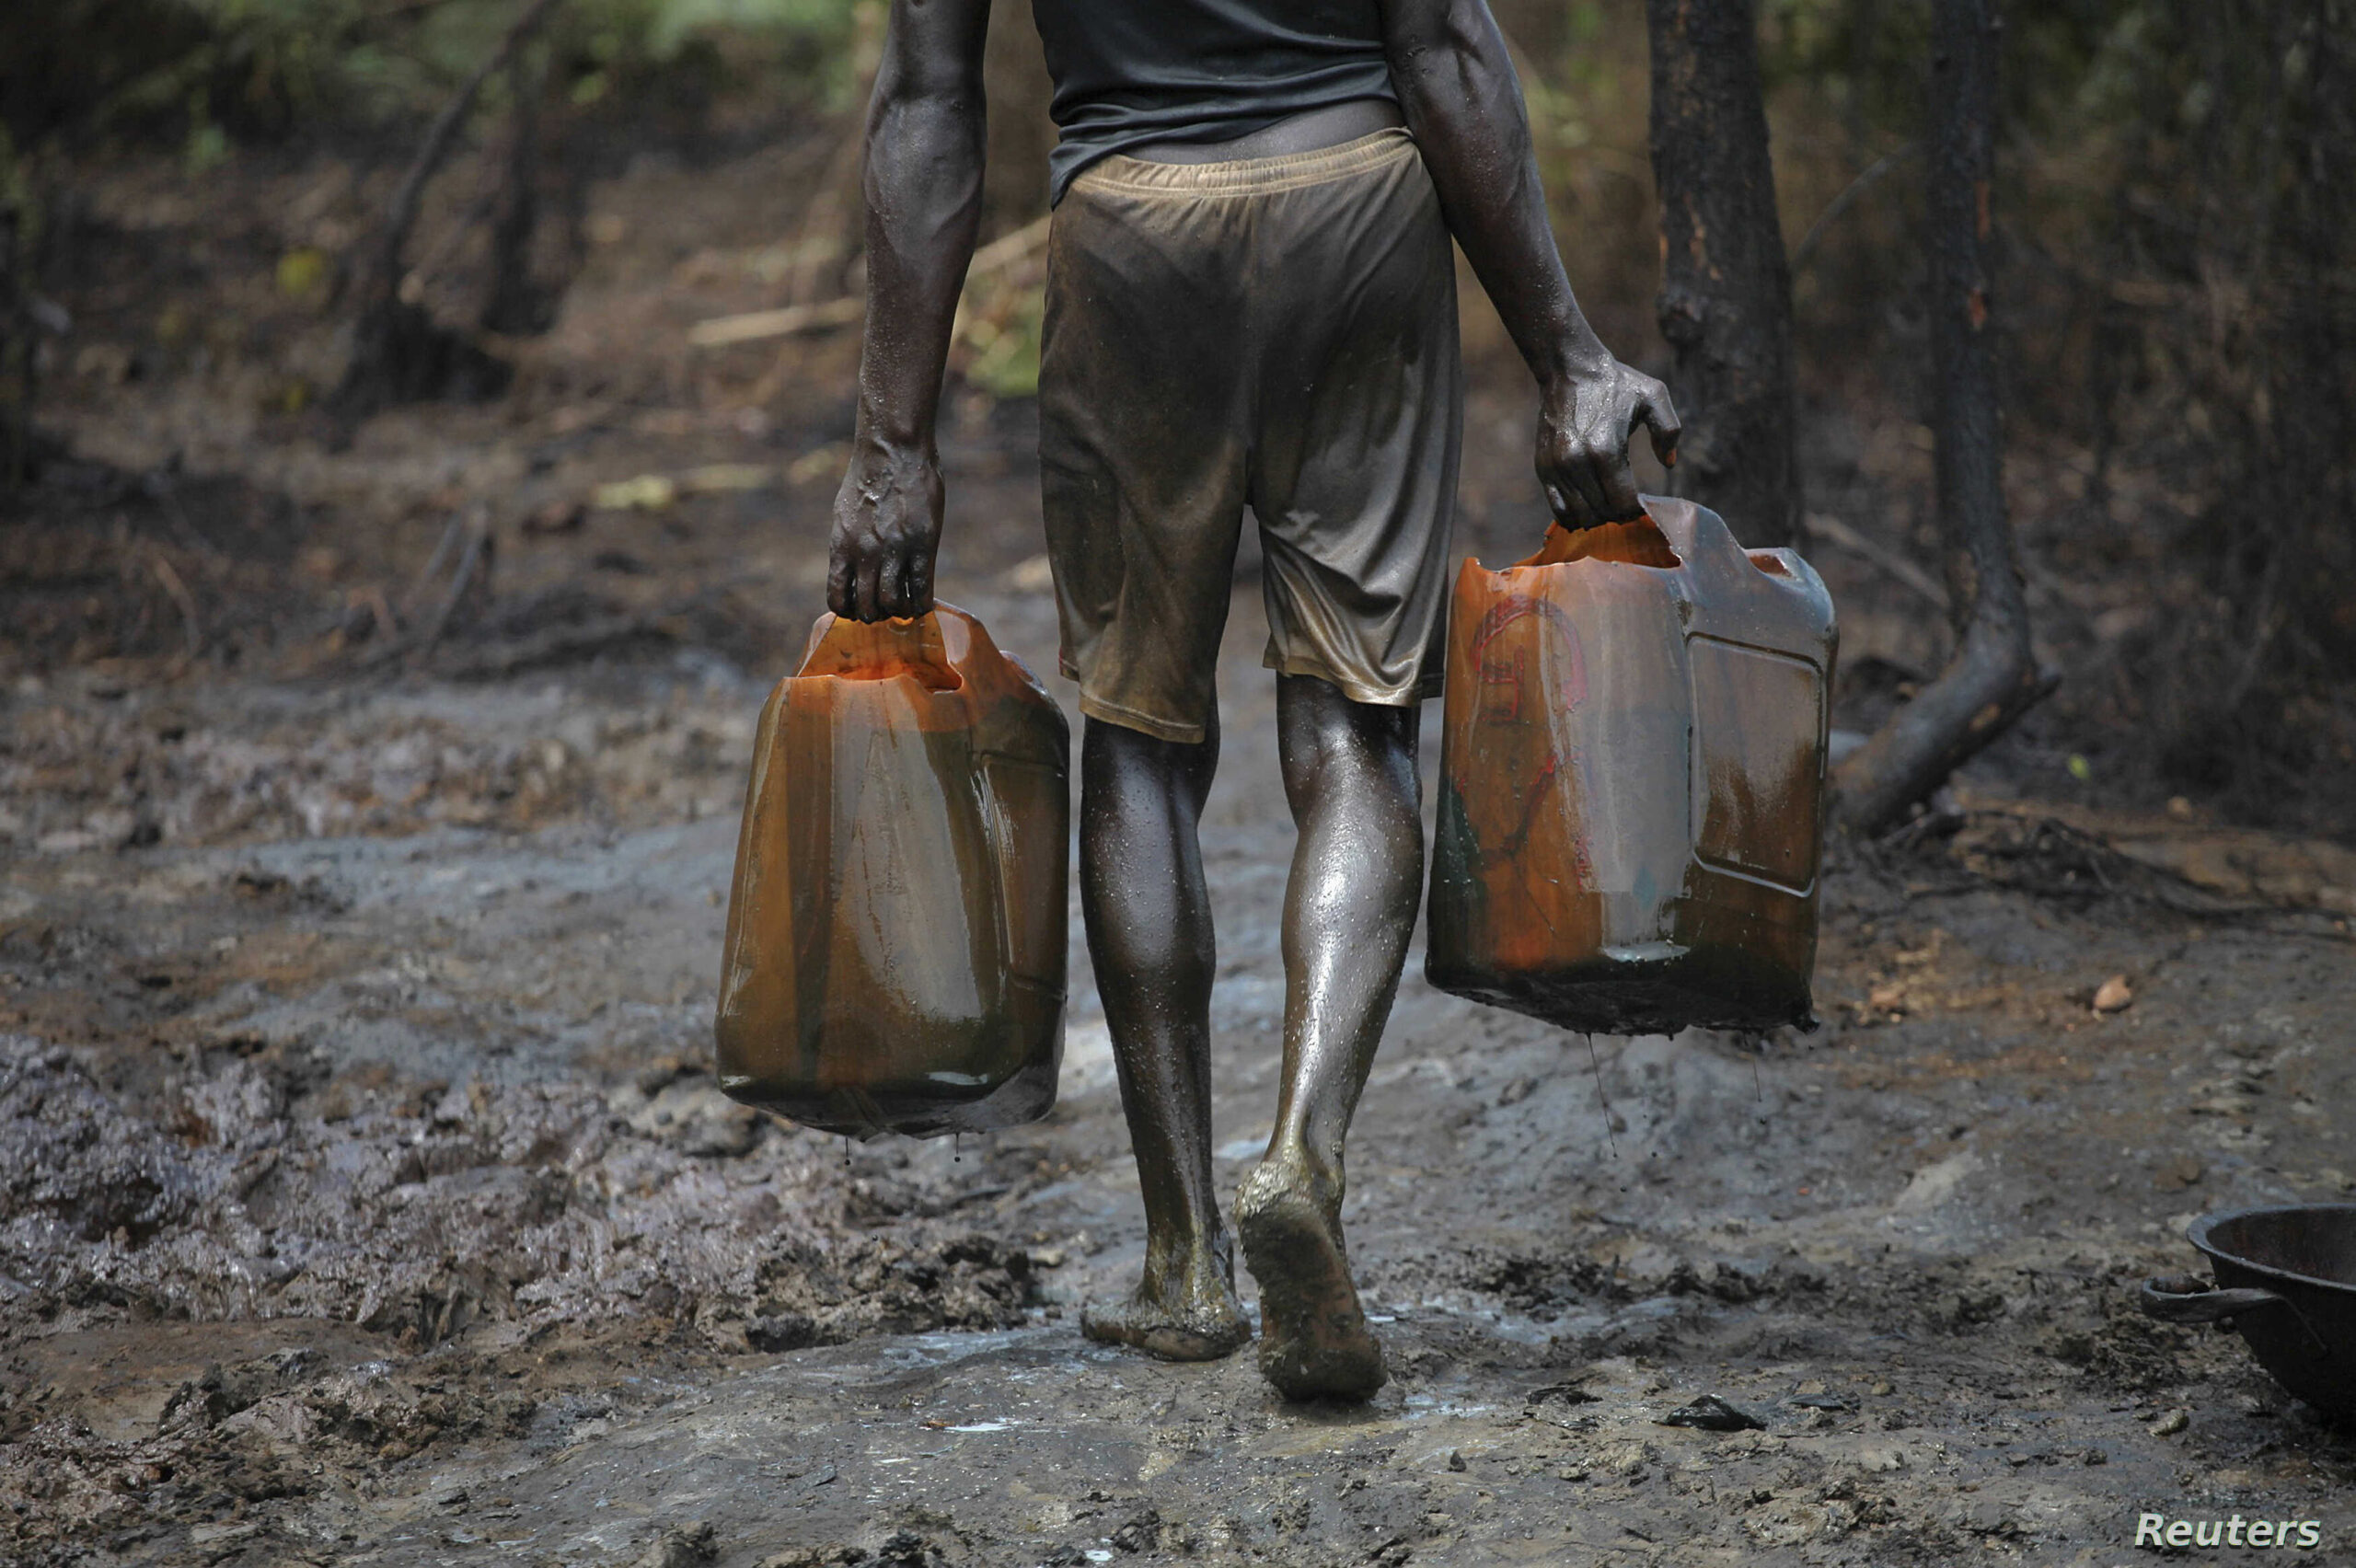 Nigeria Lost N4.3tn To Oil Theft In 5 Years - FG